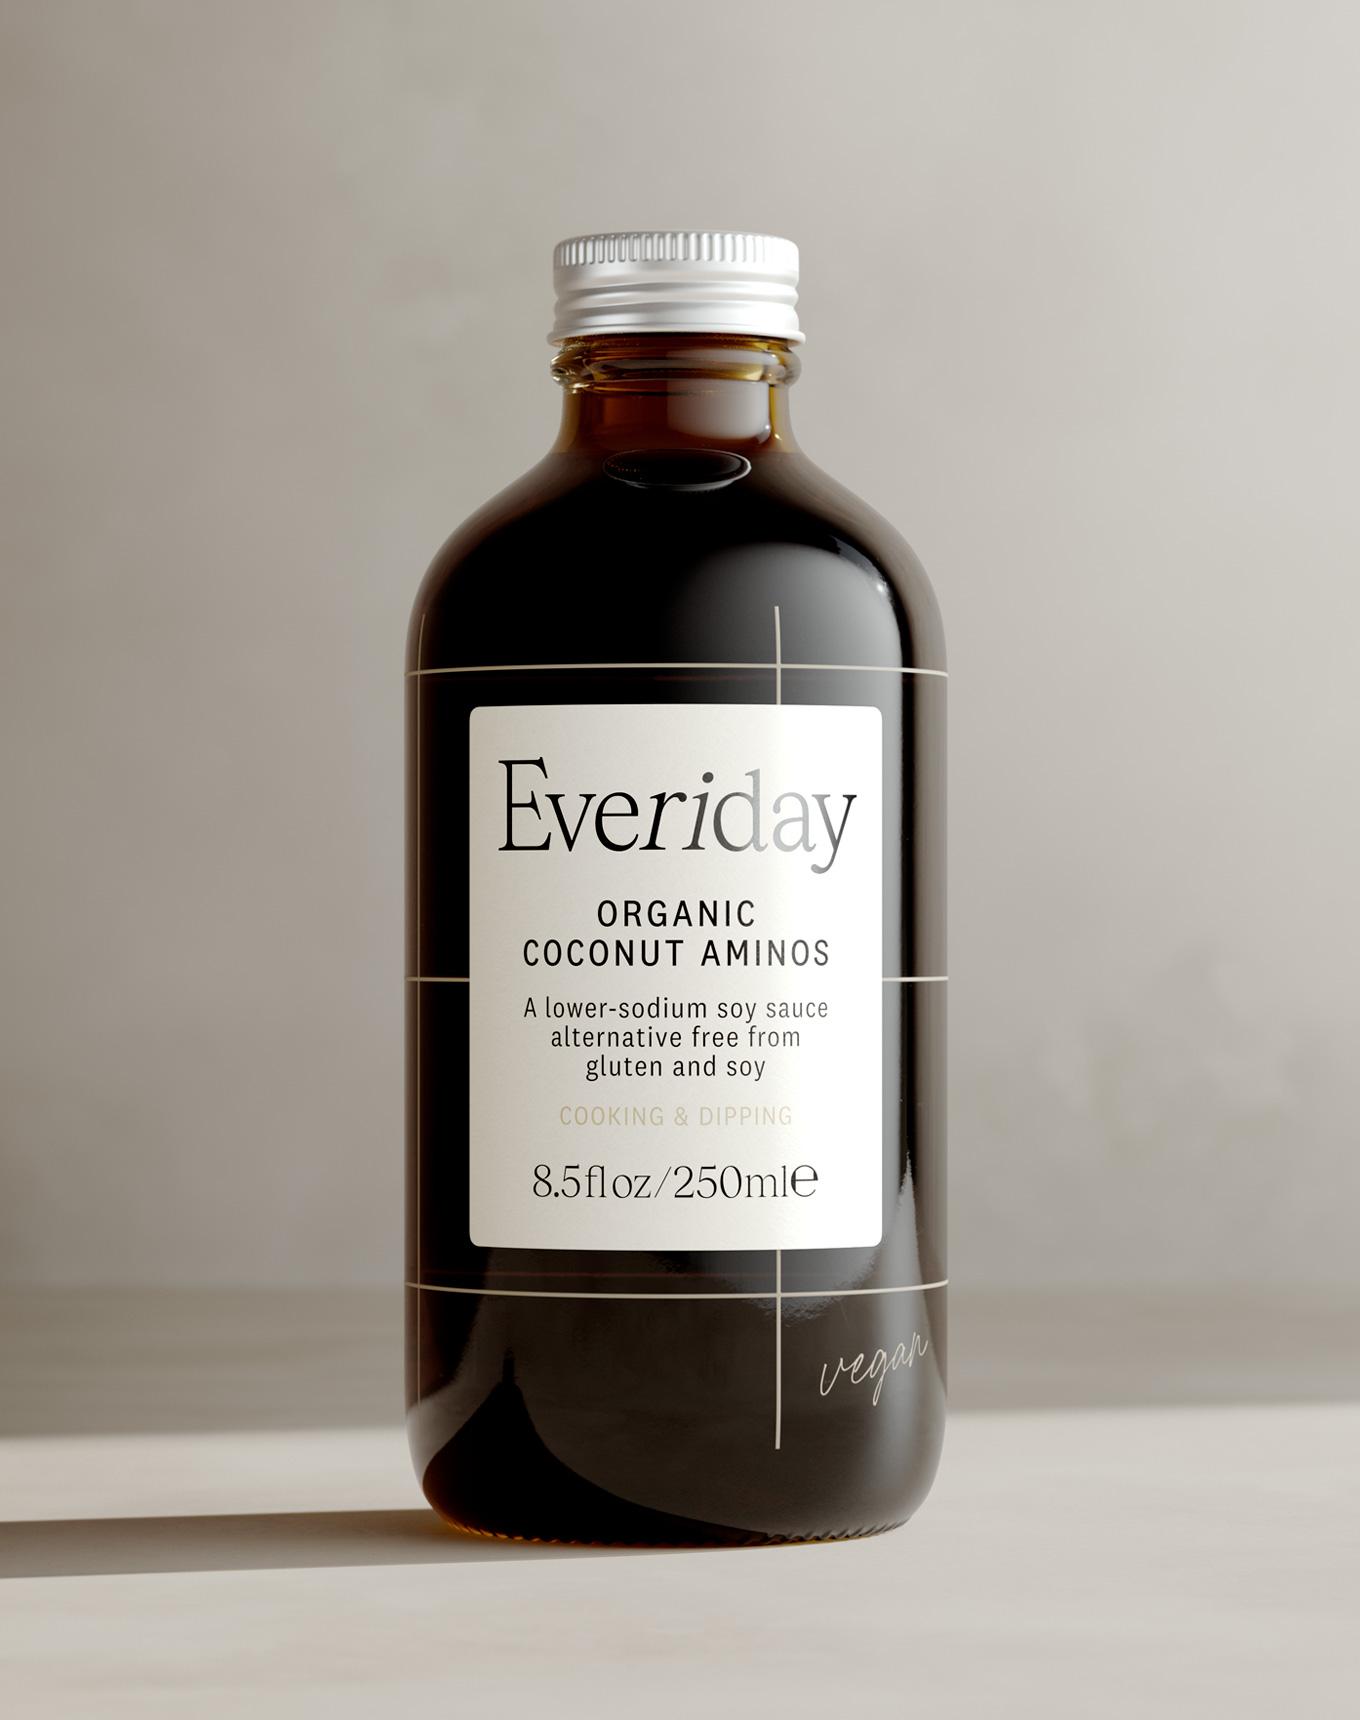 Everiday Packaging Design